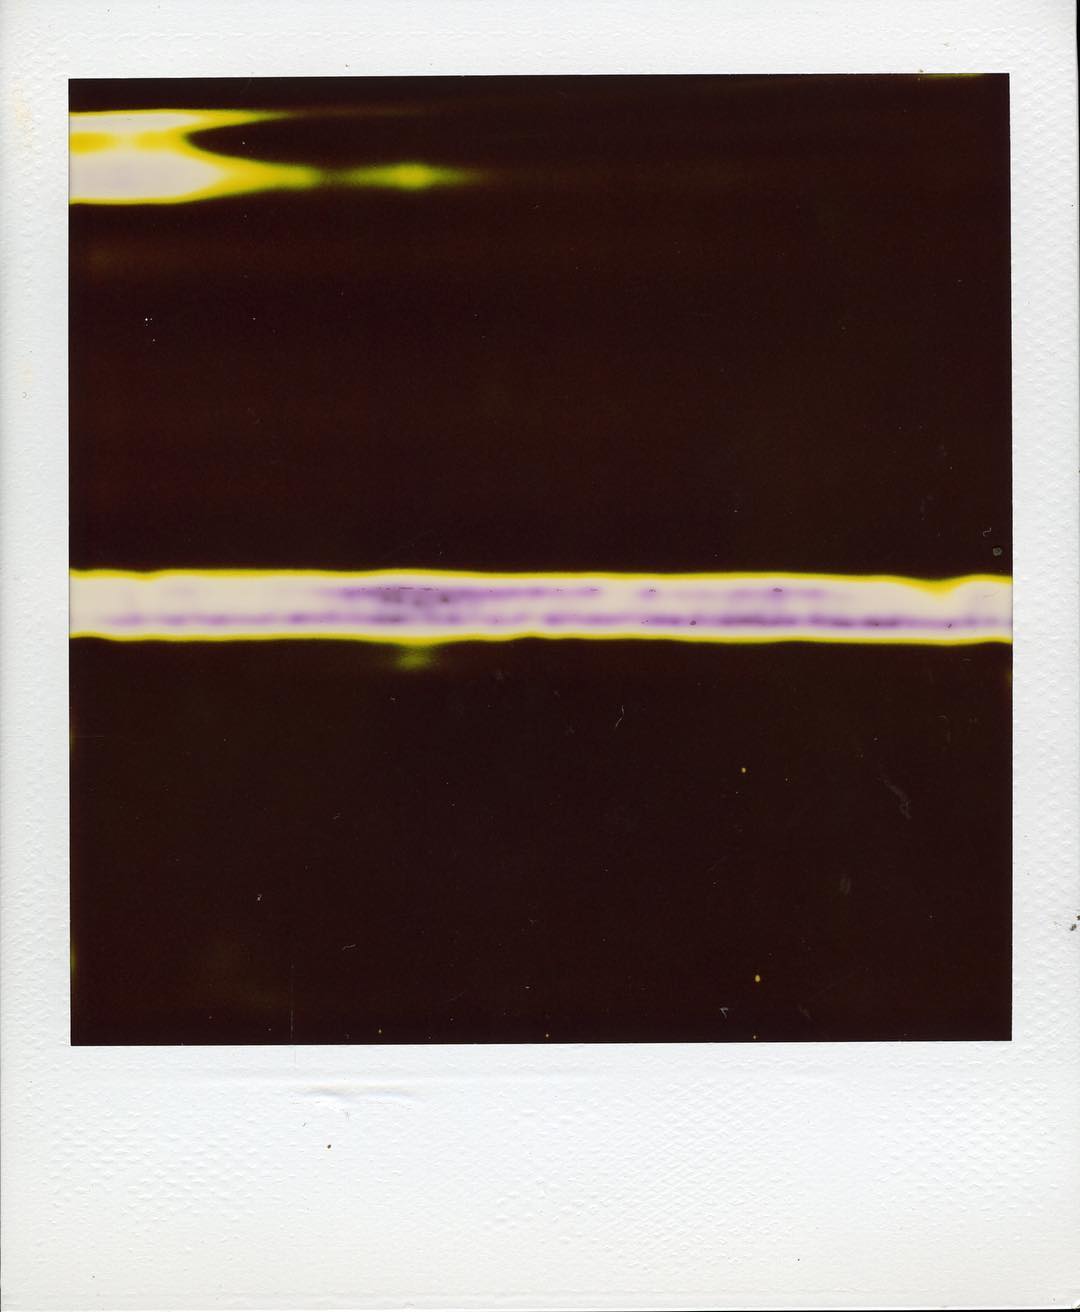 Zap! #aprilfailsday Another example of a pack that expelled more than one piece of film per shot. #film #filmphotography #polaroid #sx70 #impossibleproject